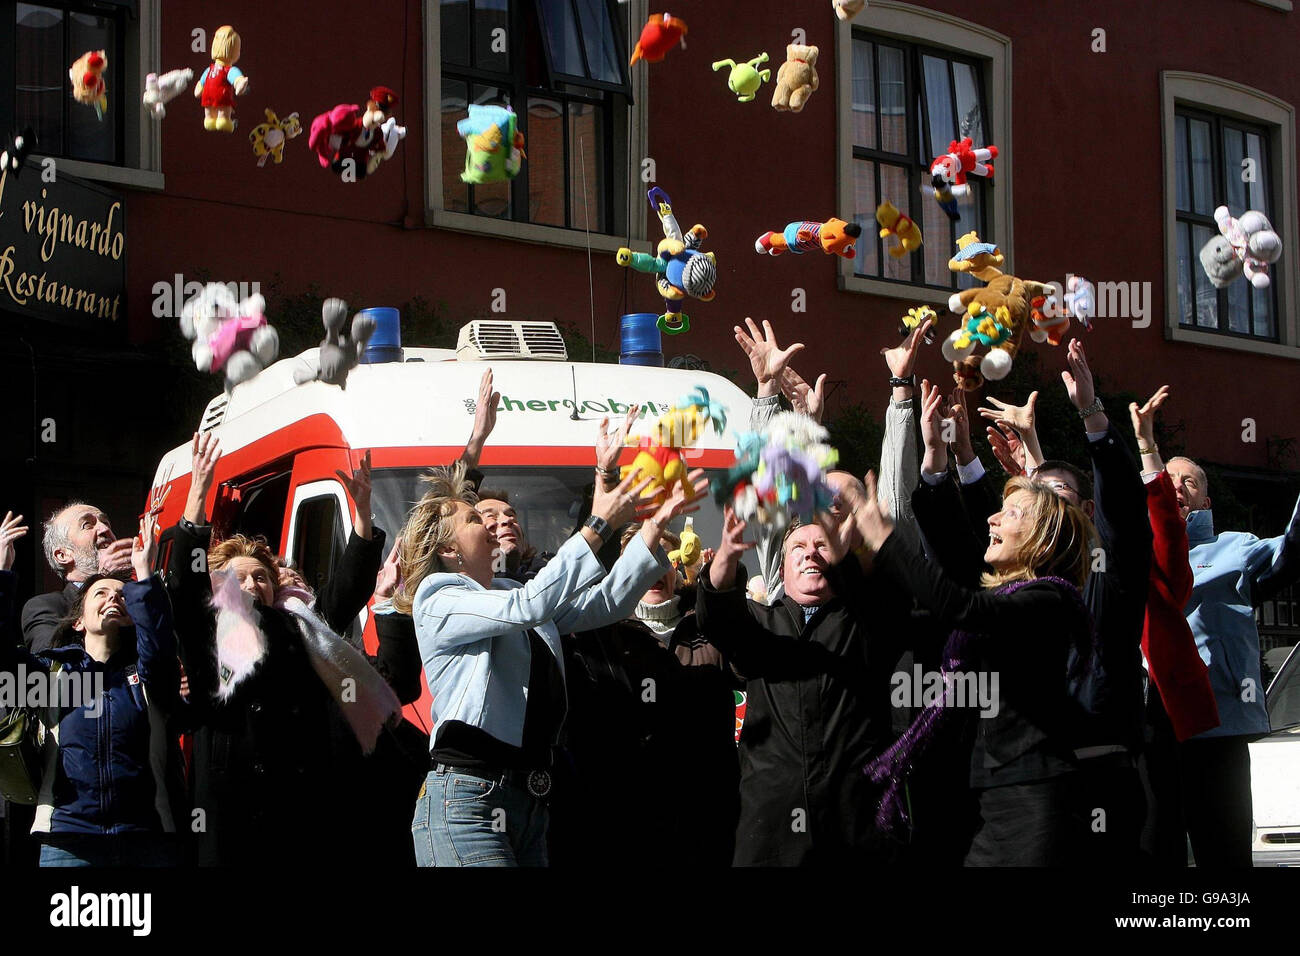 Staff from the Irish Dept of Social and Family Affairs throw donated childrens toys into the air beside a special ambulance, Dublin, Monday April 3 2006, which will be travelling to Belarus as part of a convoy to mark the 20th anniversary of the Chernobyl disaster. PRESS ASSOCIATION Photo. Photo credit should read: Julien Behal/PA Stock Photo